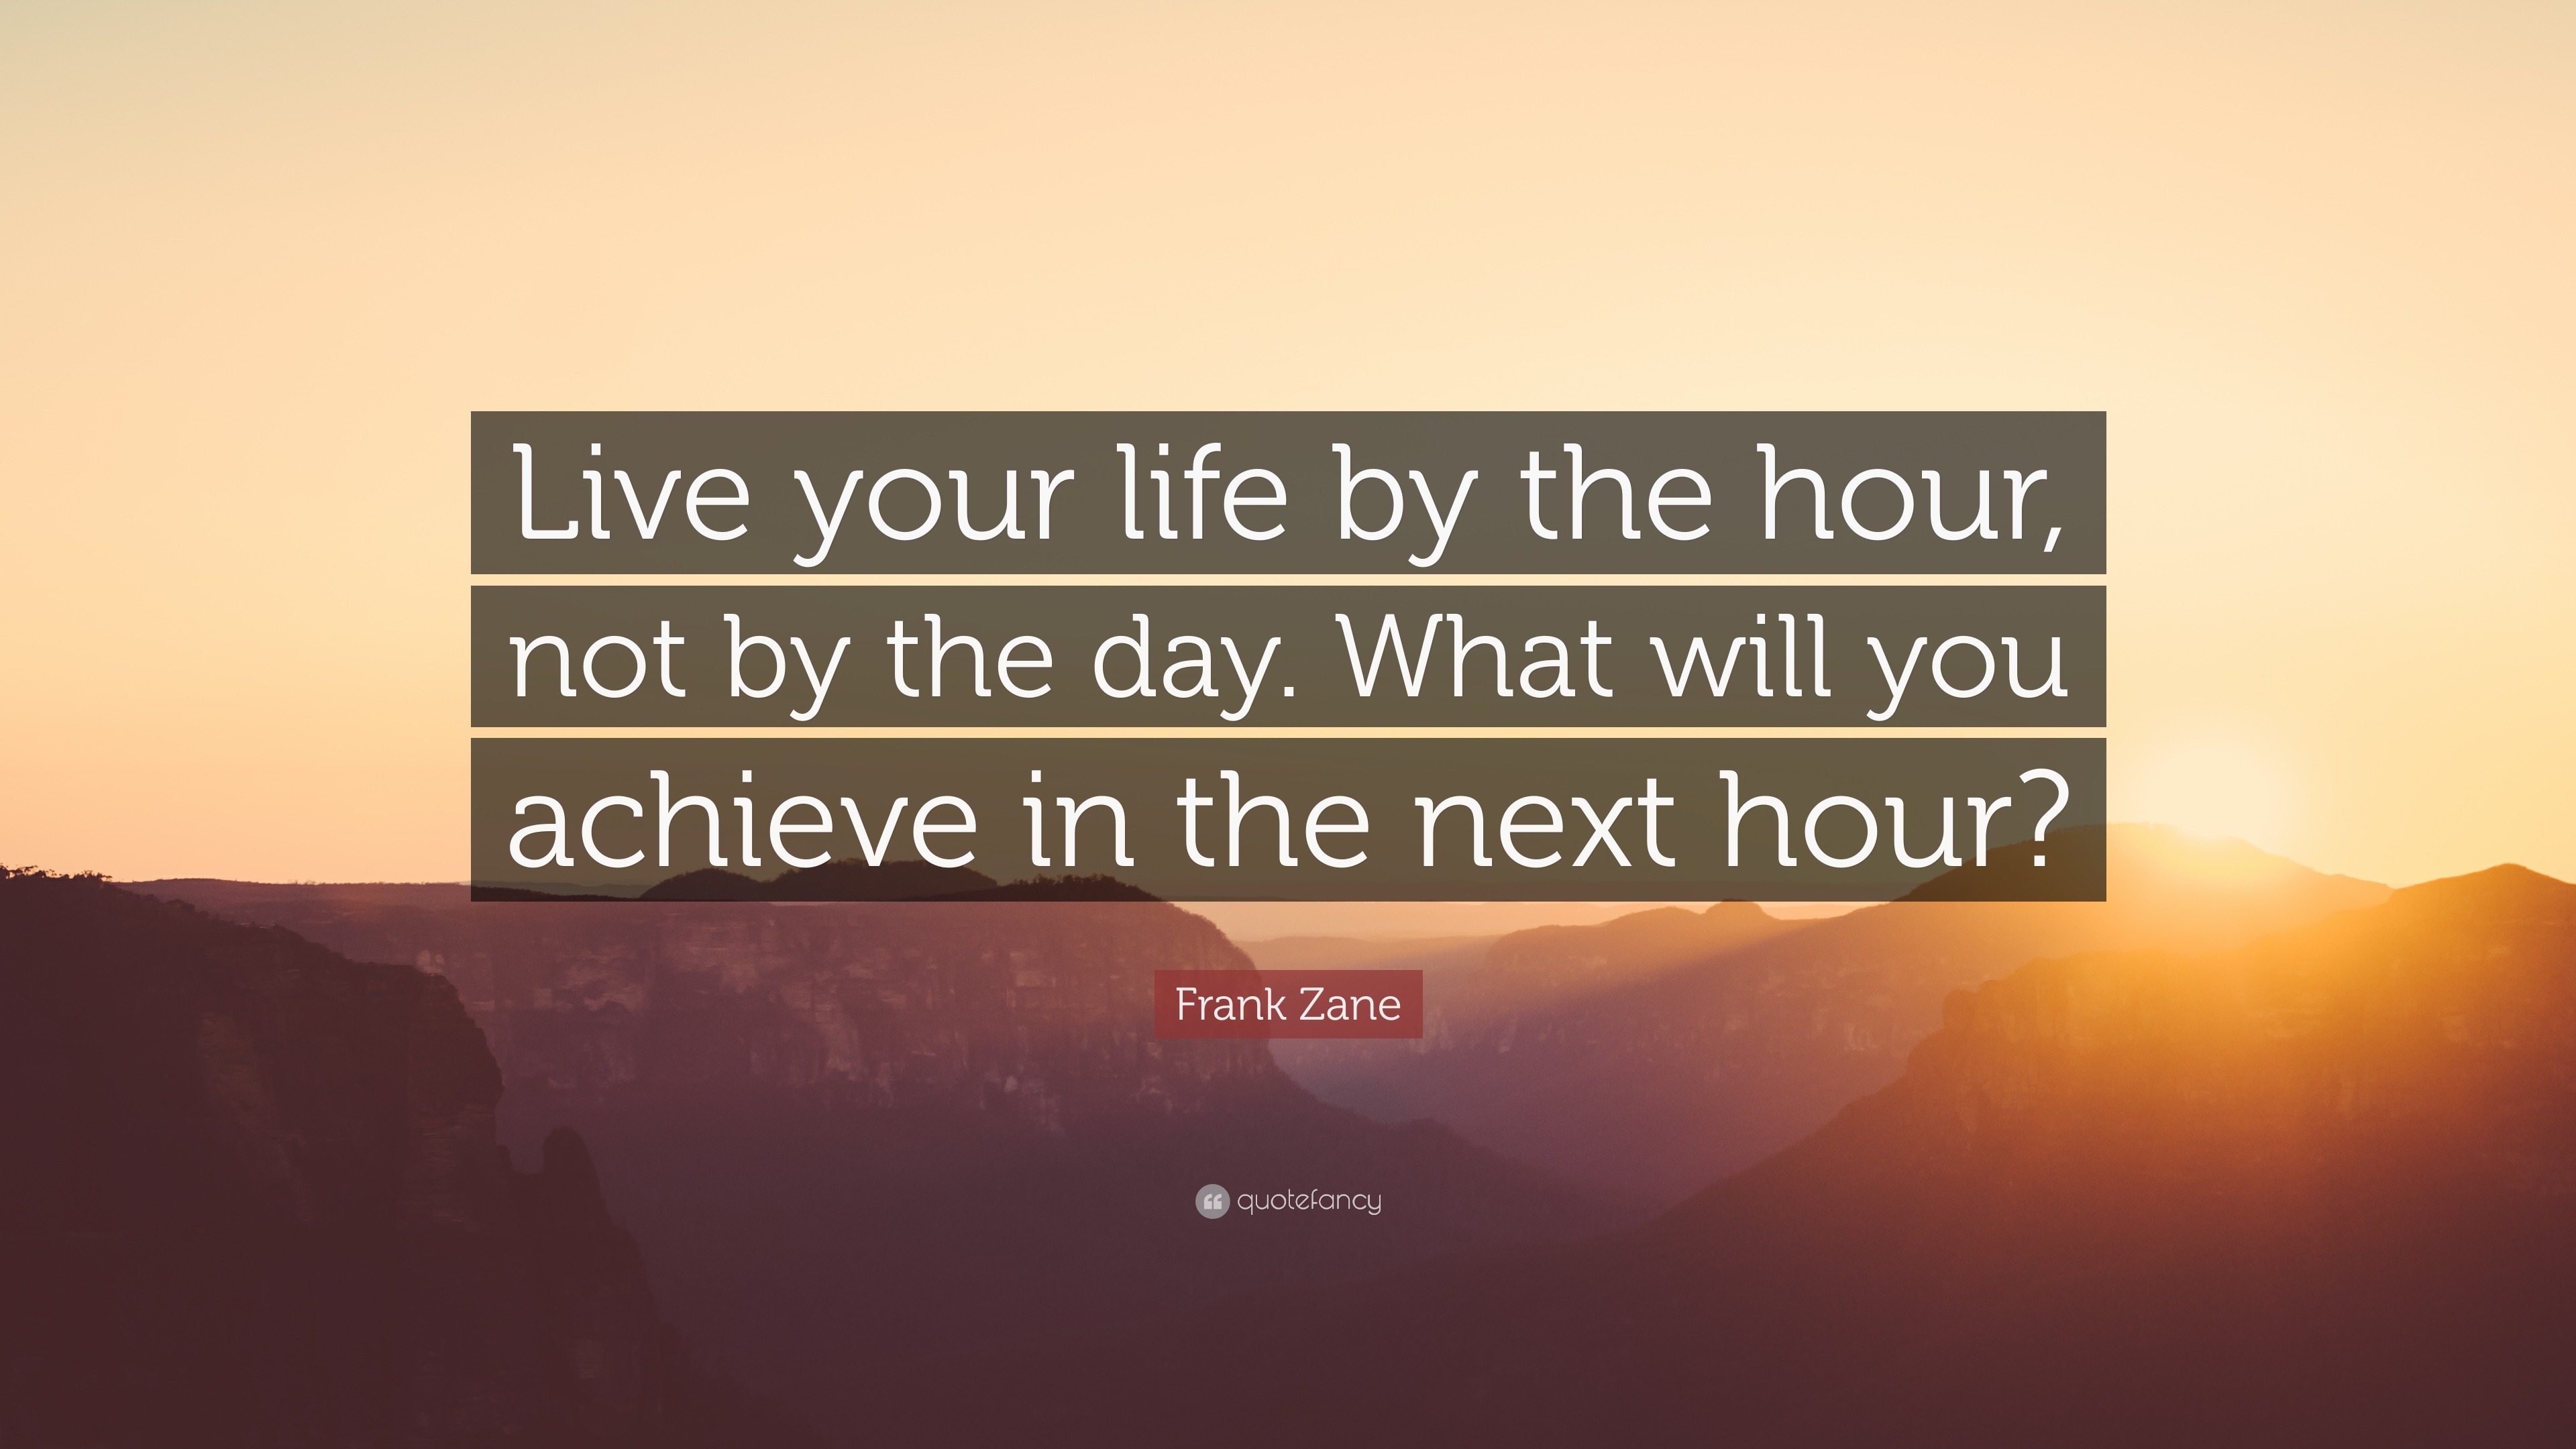 Frank Zane Quote “Live your life by the hour not by the day